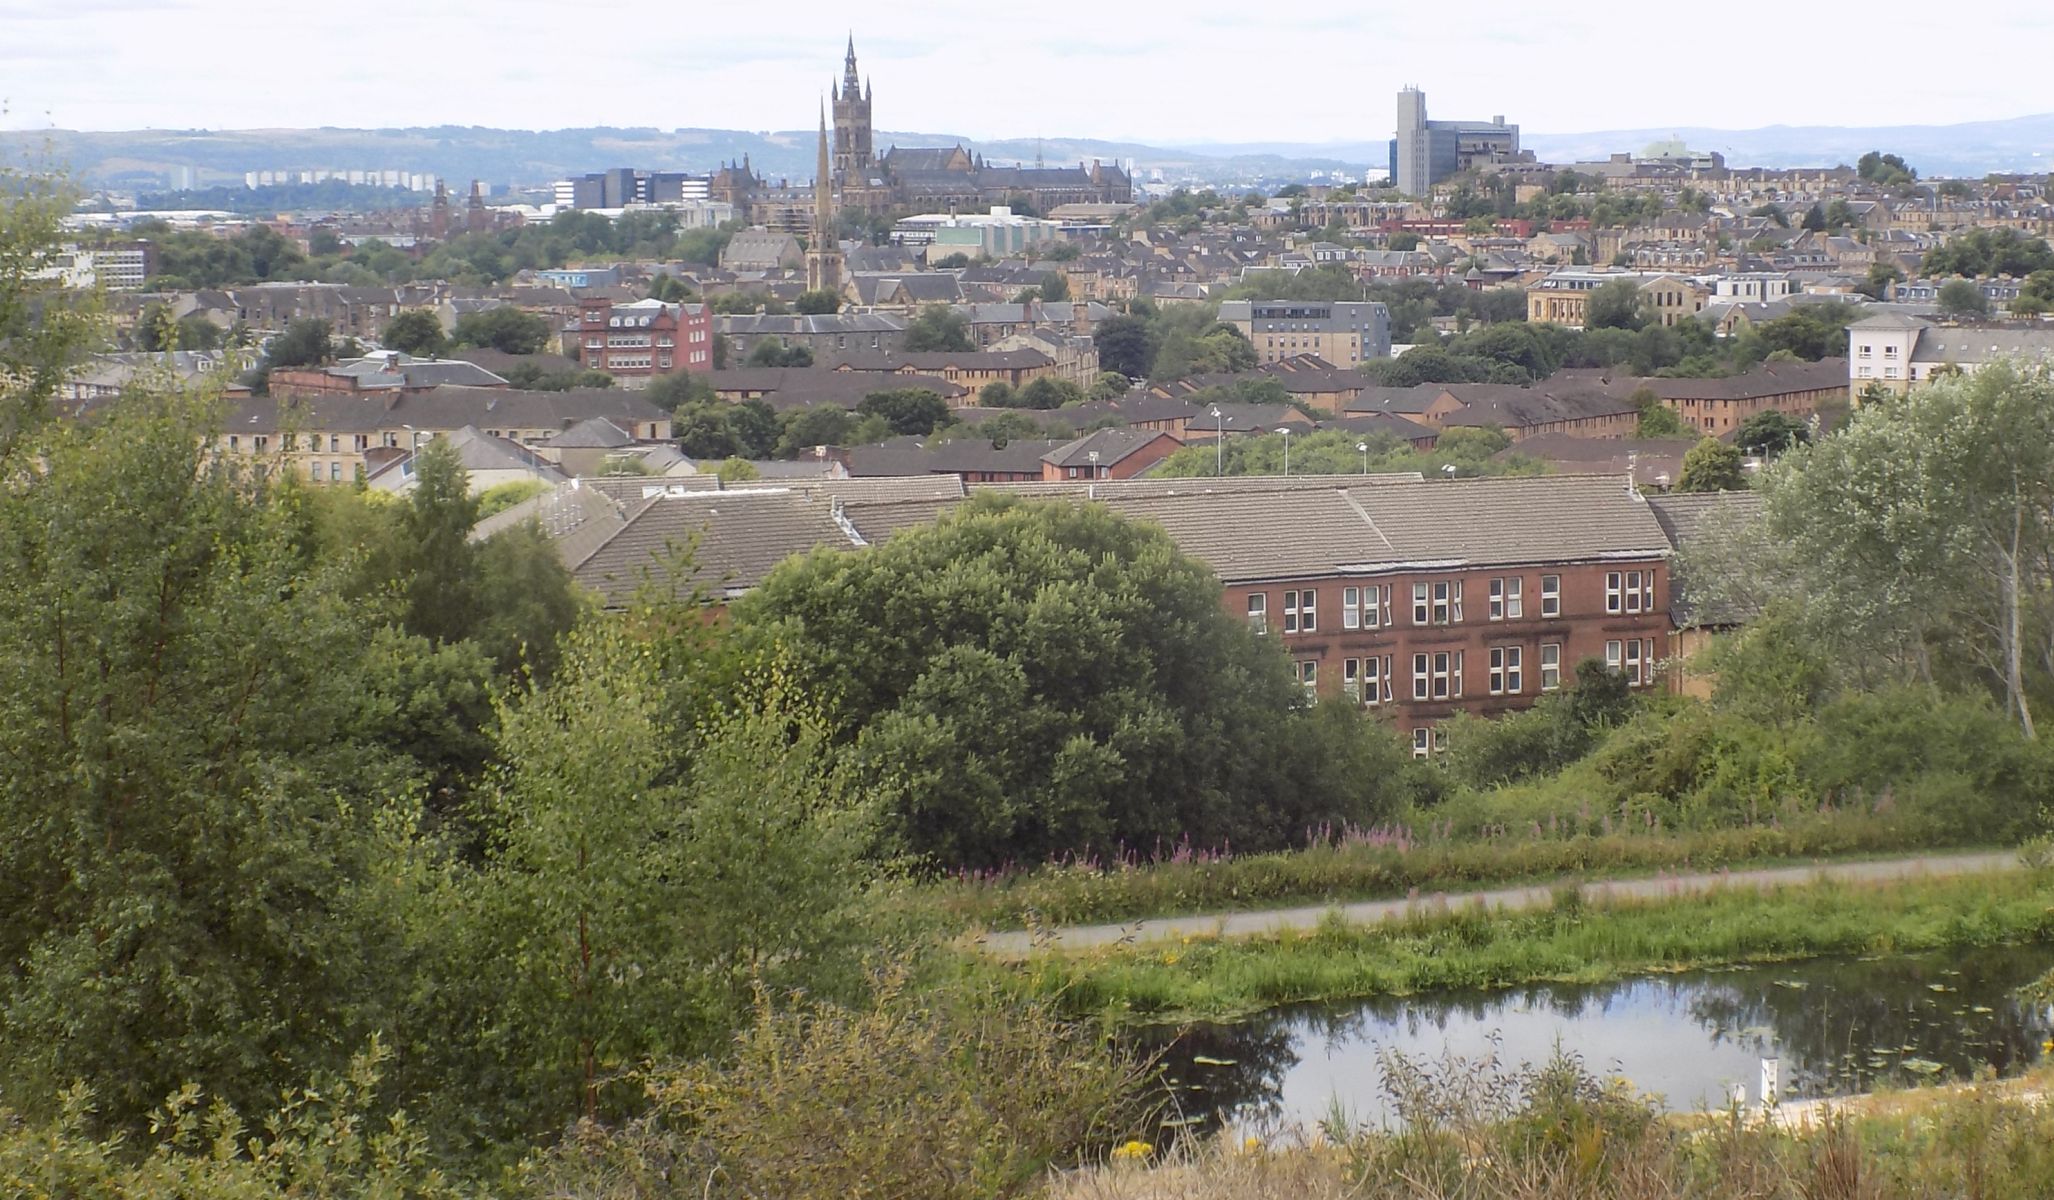 Tower of Glasgow University across the Forth and Clyde Canal from the viewpoint in Claypits Nature & Wildlife Reserve